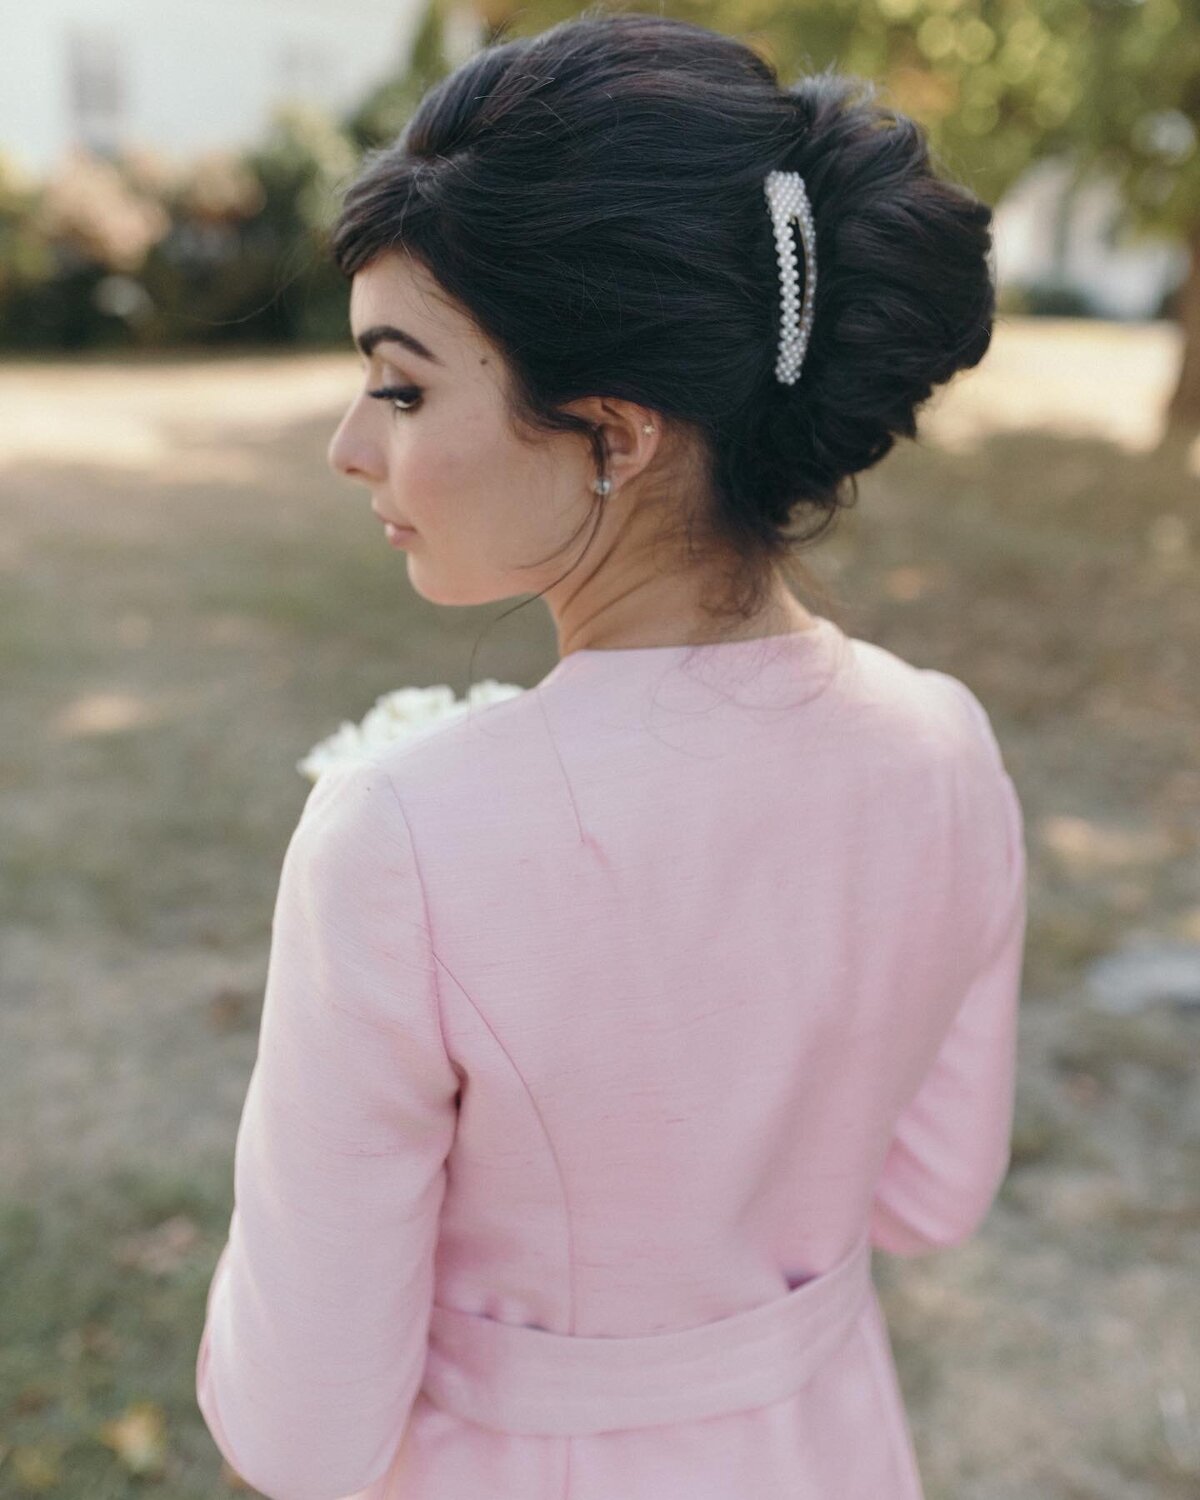 erica-renee-beauty-audrey-hepburn-inspired-pearl-clip-french-twist-pink-suit-elopement-CT-NY-NYC-hair-makeup-editorial-brunette-bride-courthouse-wedding-beauty